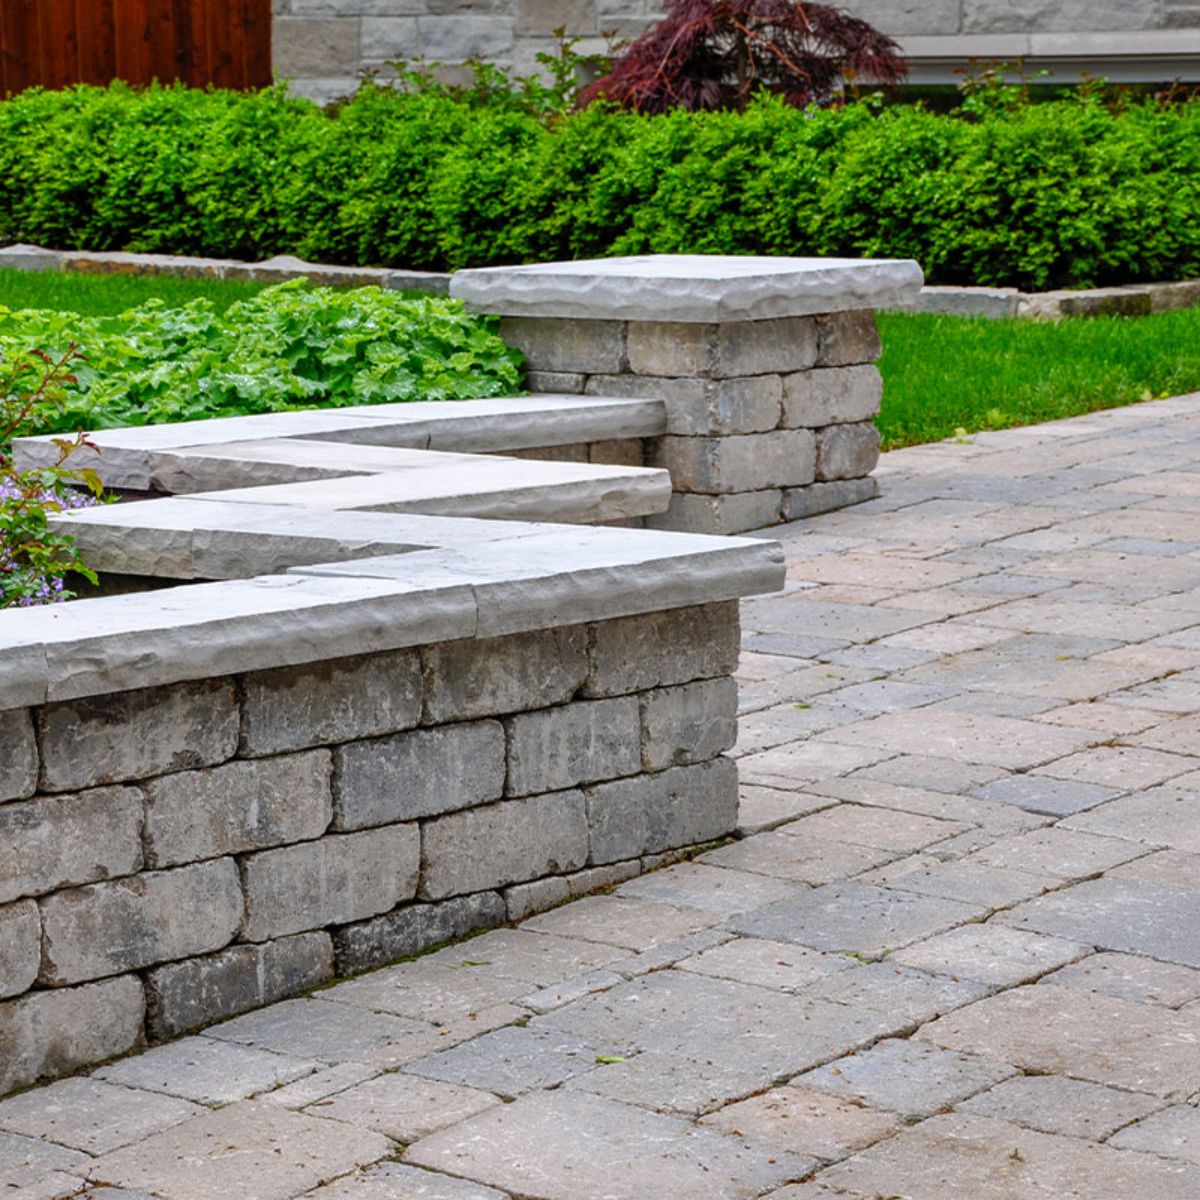 Got a Paving & Walling Project?